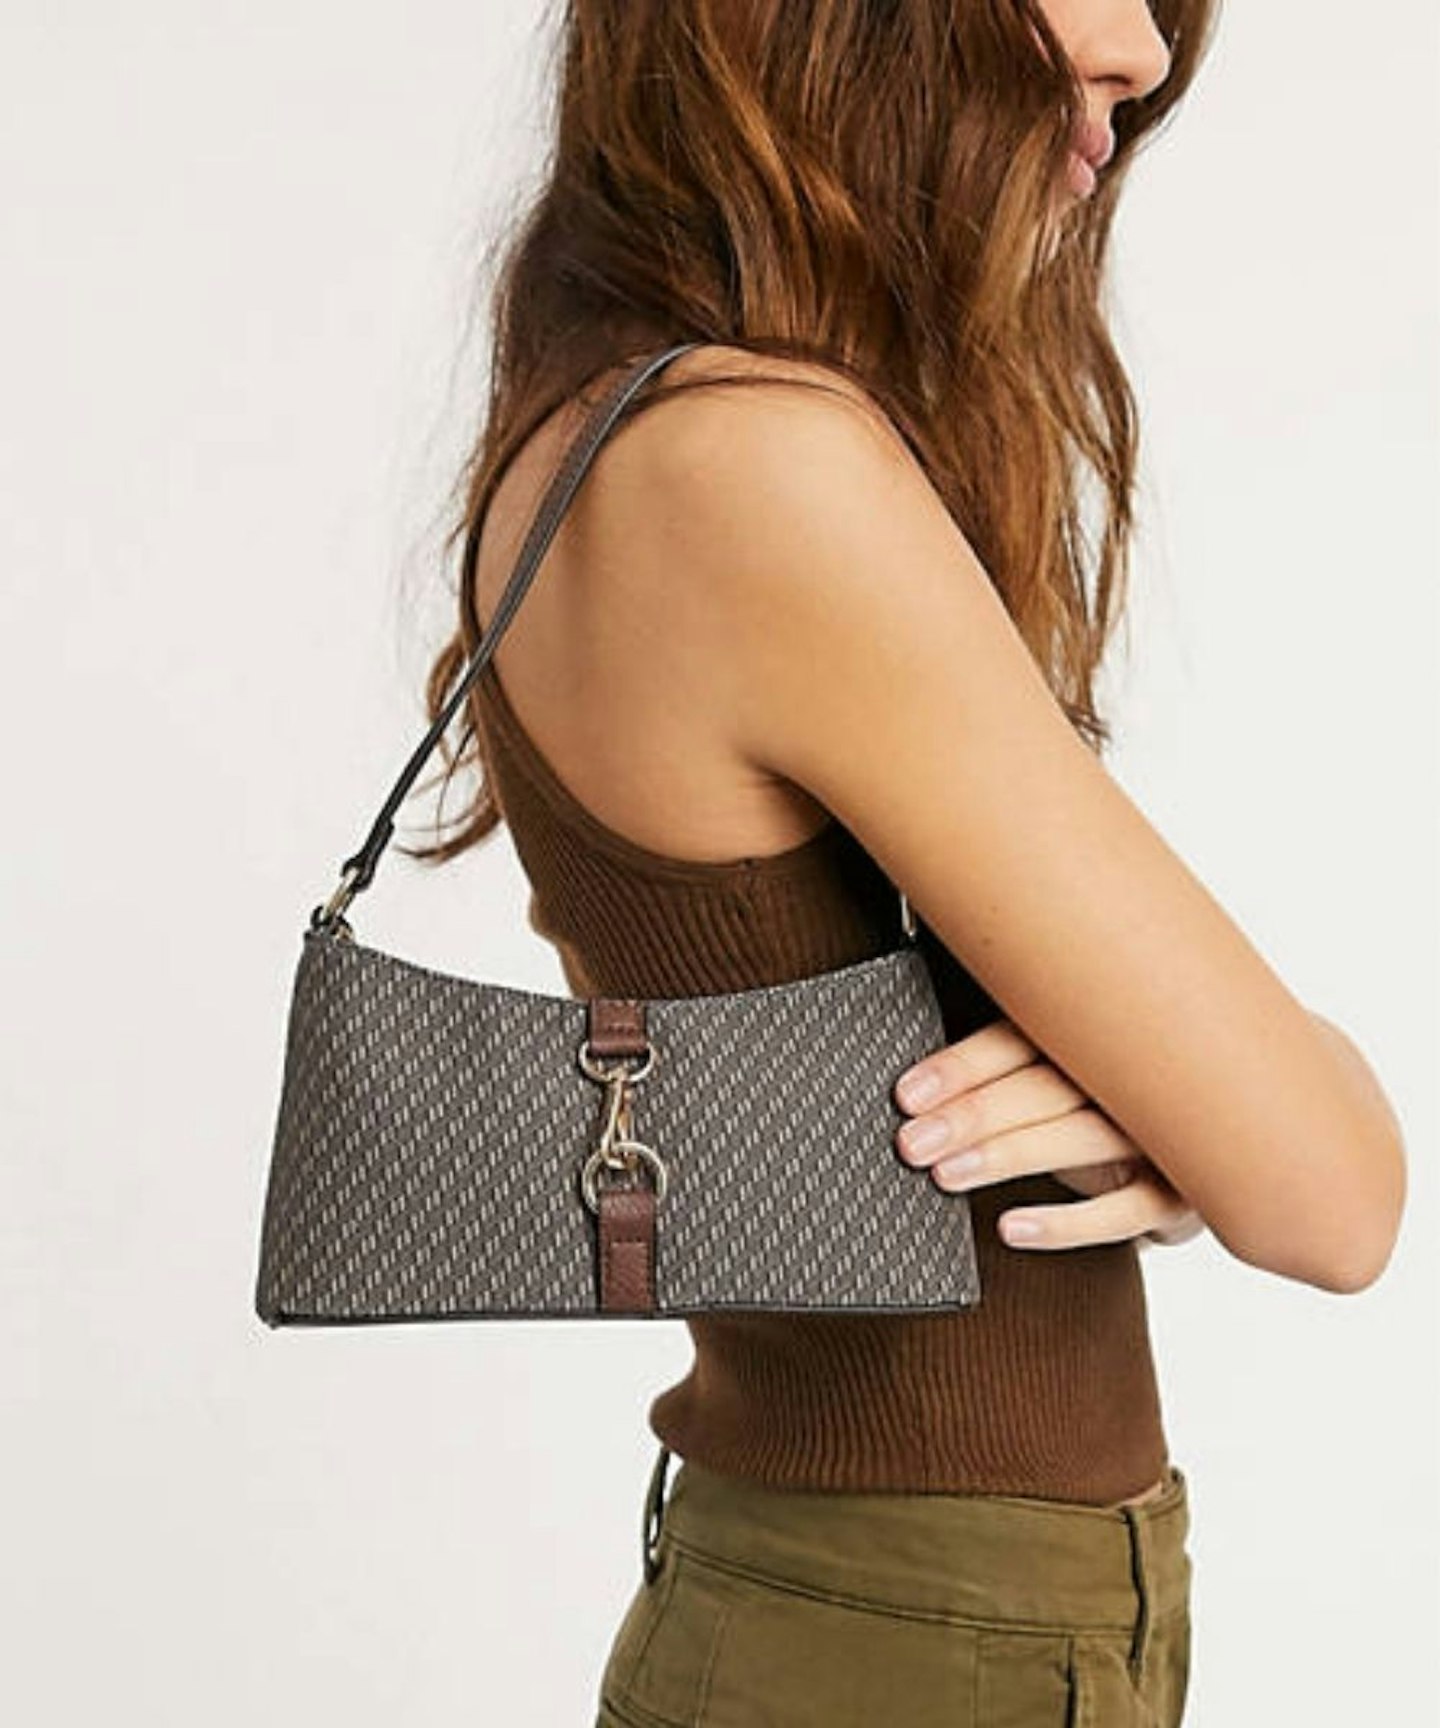 The '90s Shoulder Bags Are Back!